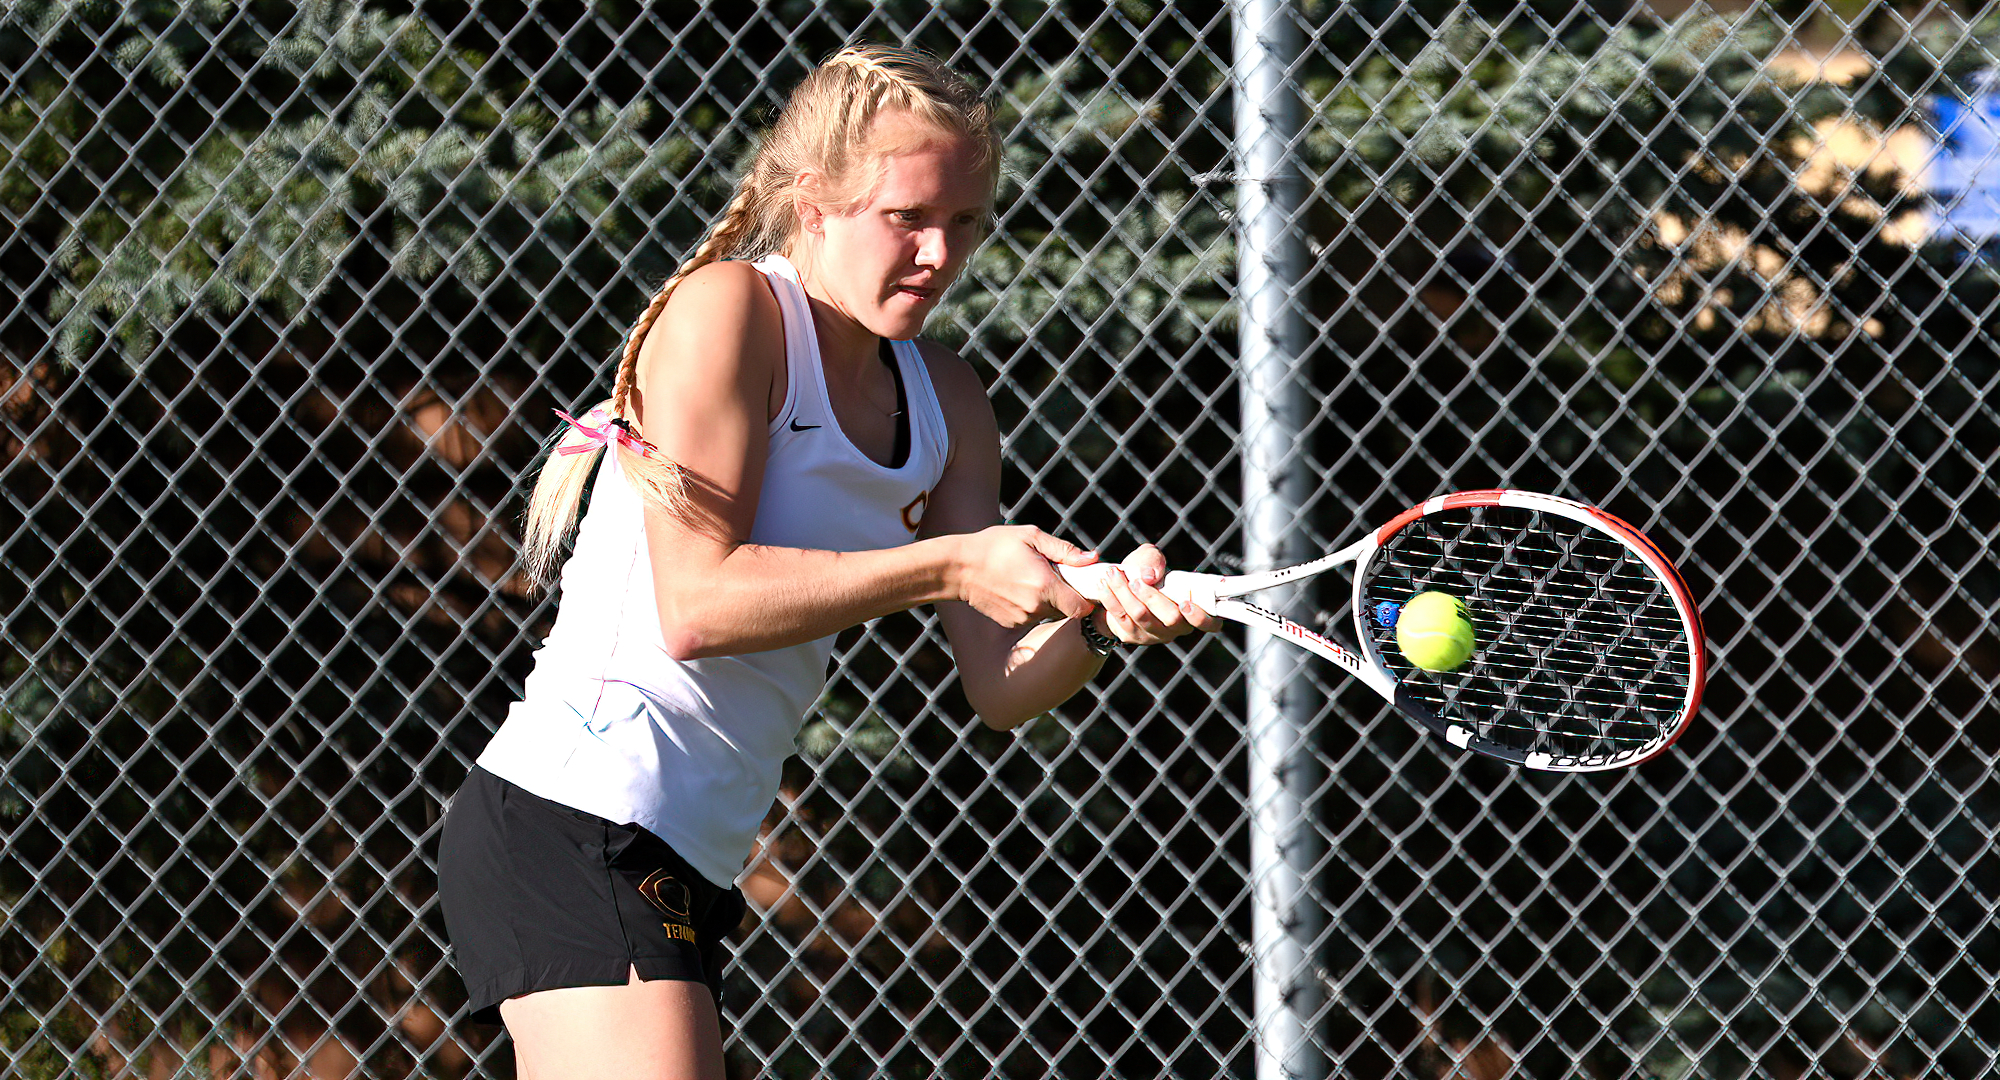 Junior Erin Borchard won both her singles and doubles matches to help Concordia post a split on its final day in Florida.